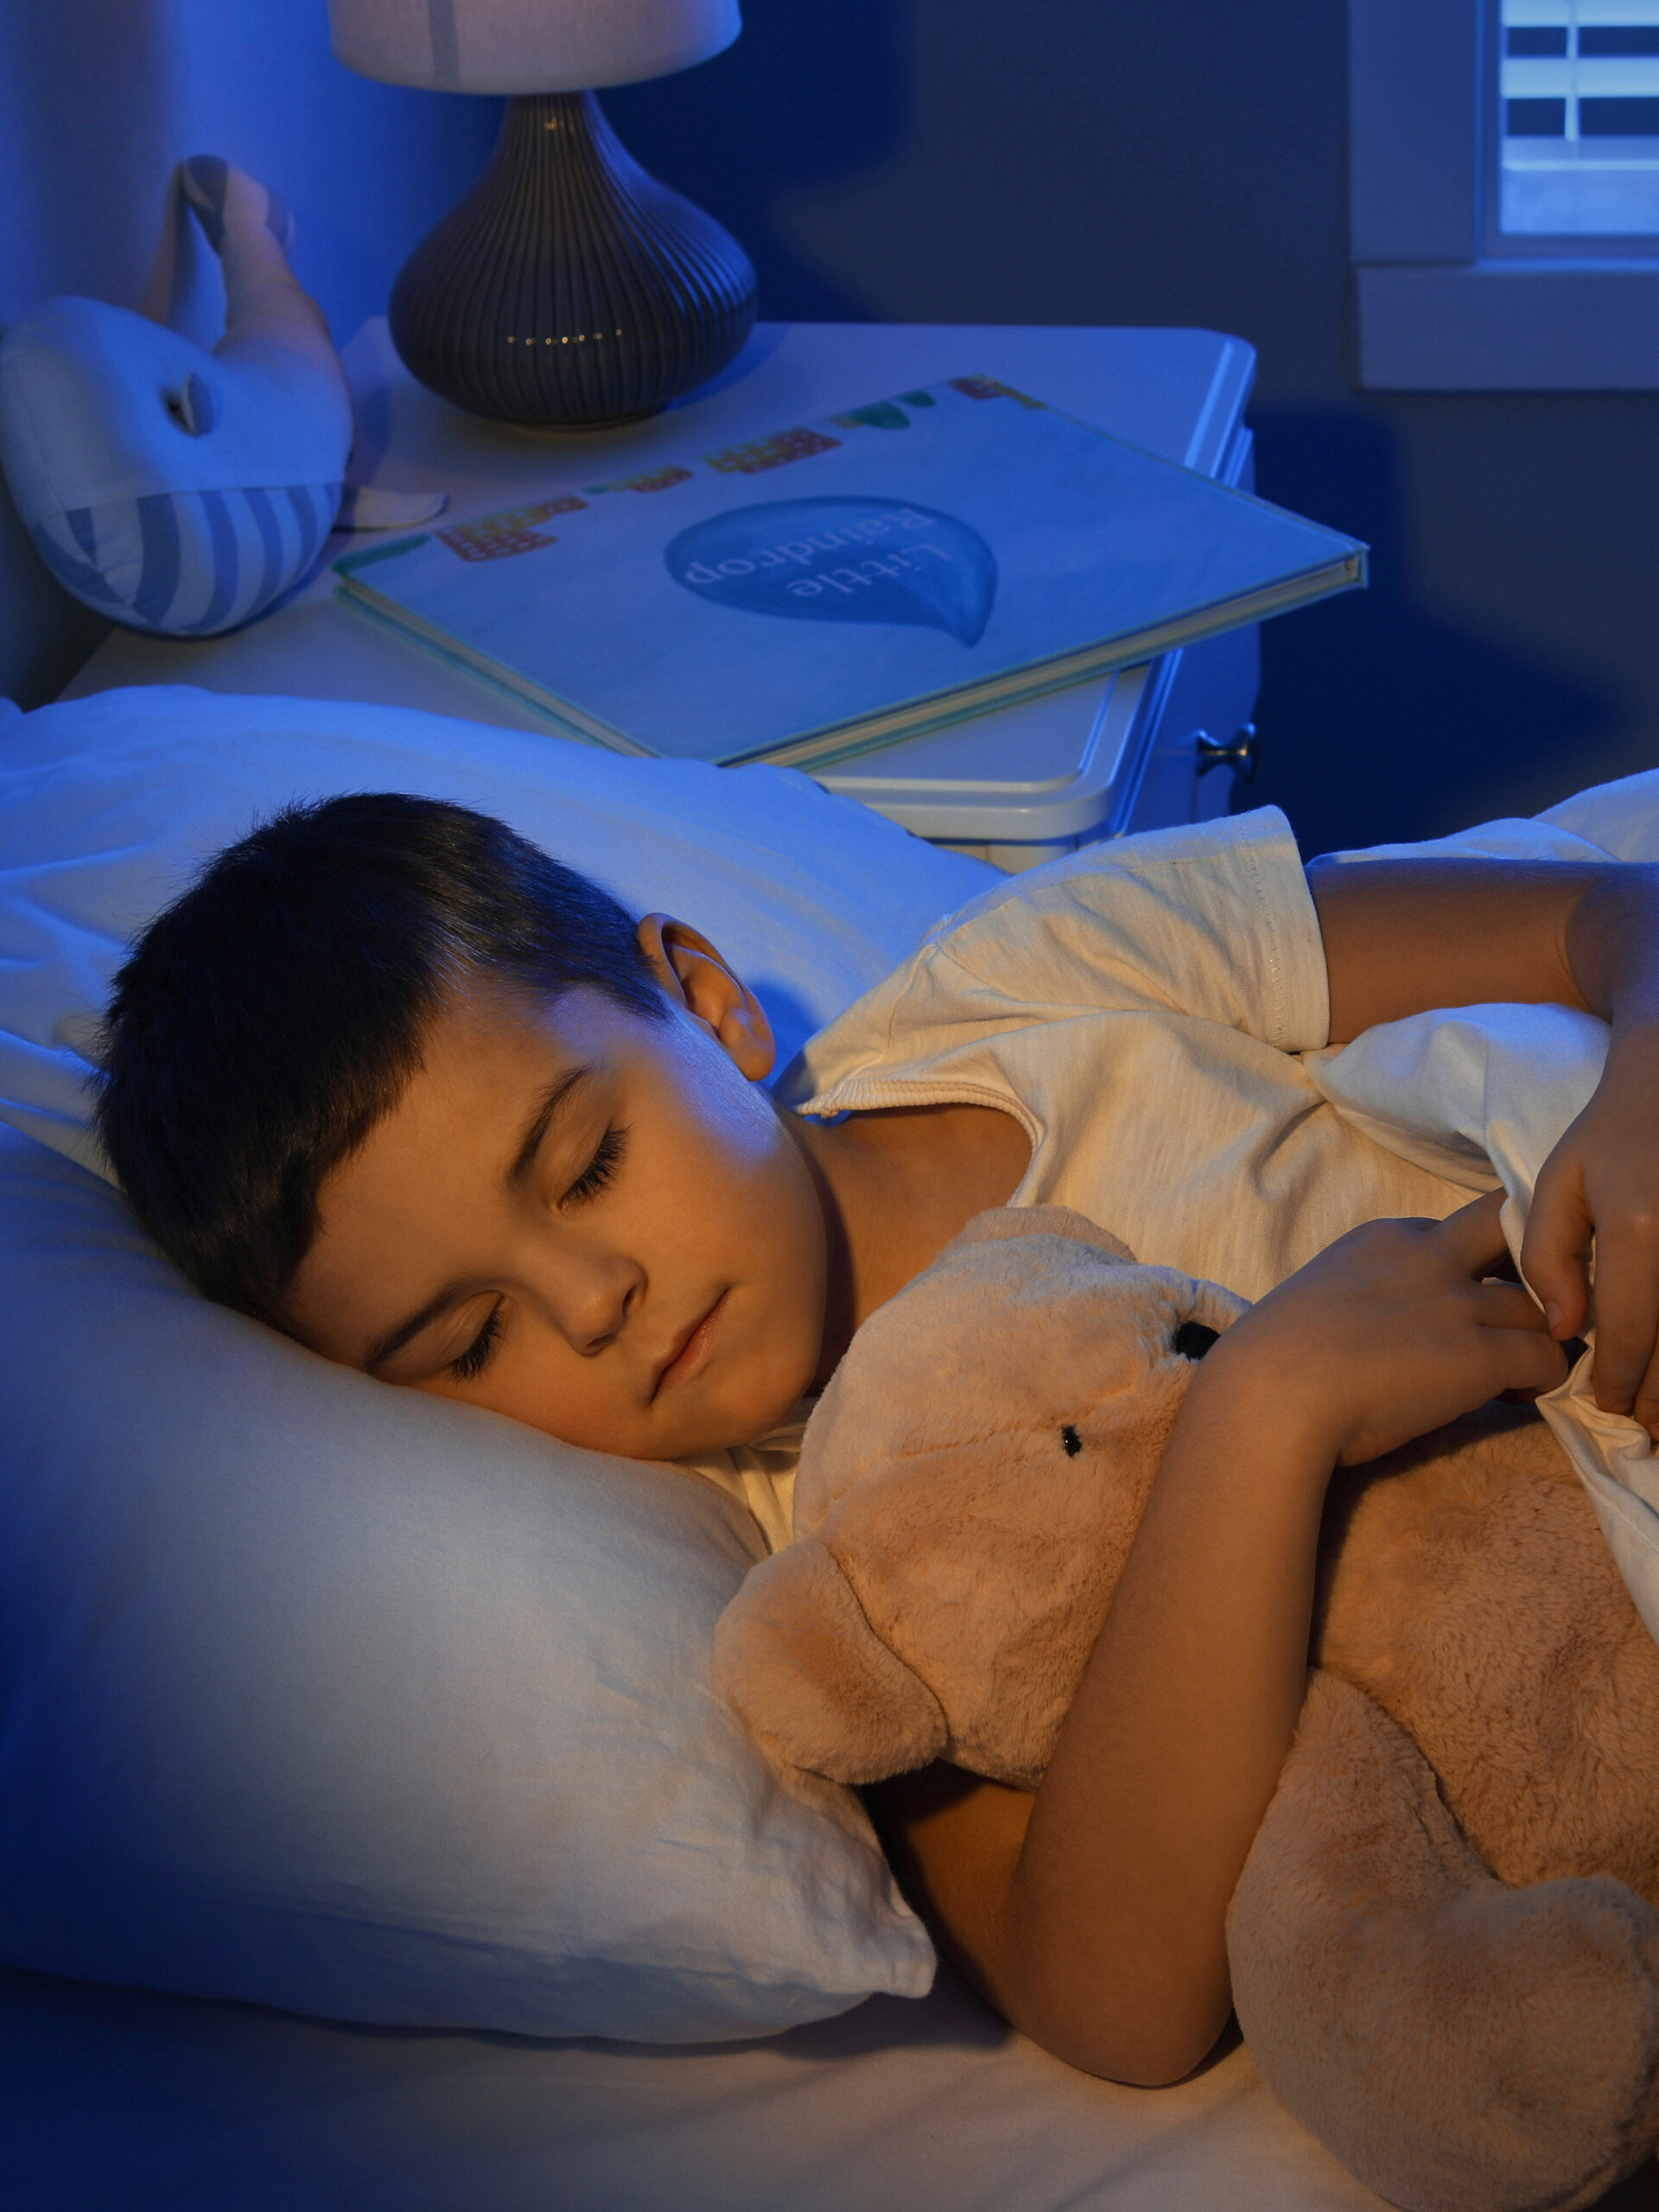 Child with trouble sleeping - what parents should know about Melatonin